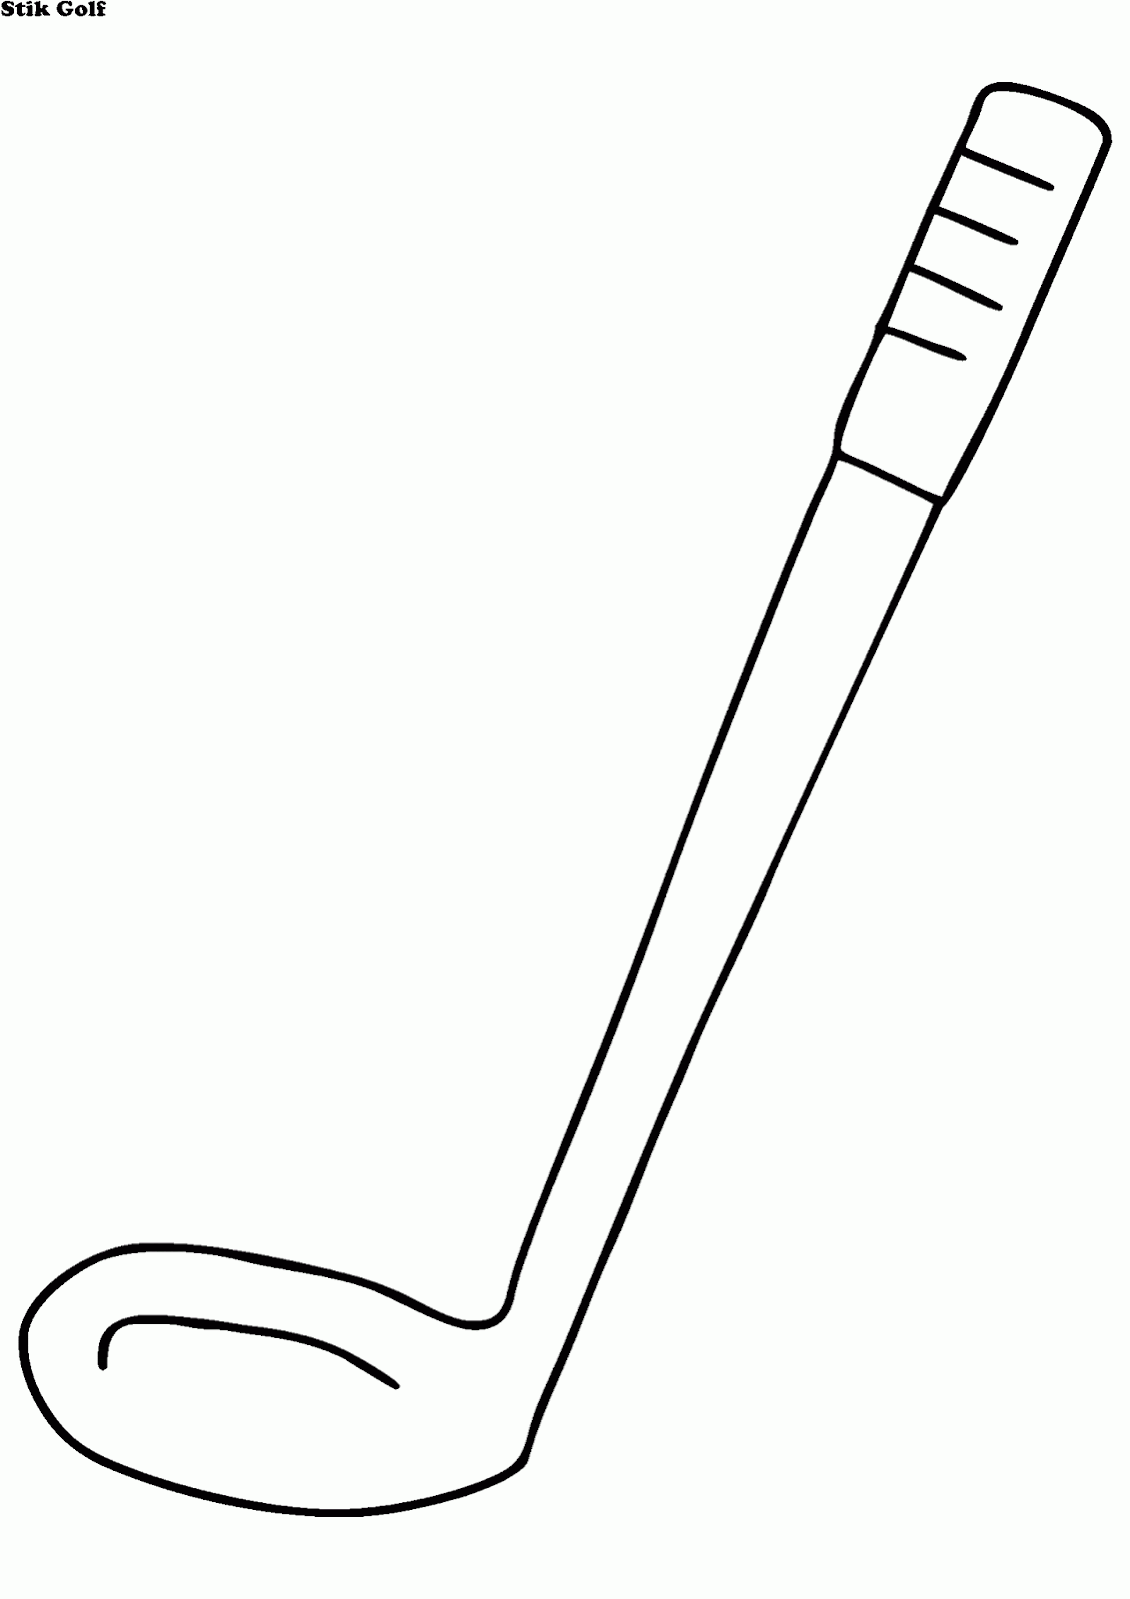 stick golf coloring pages